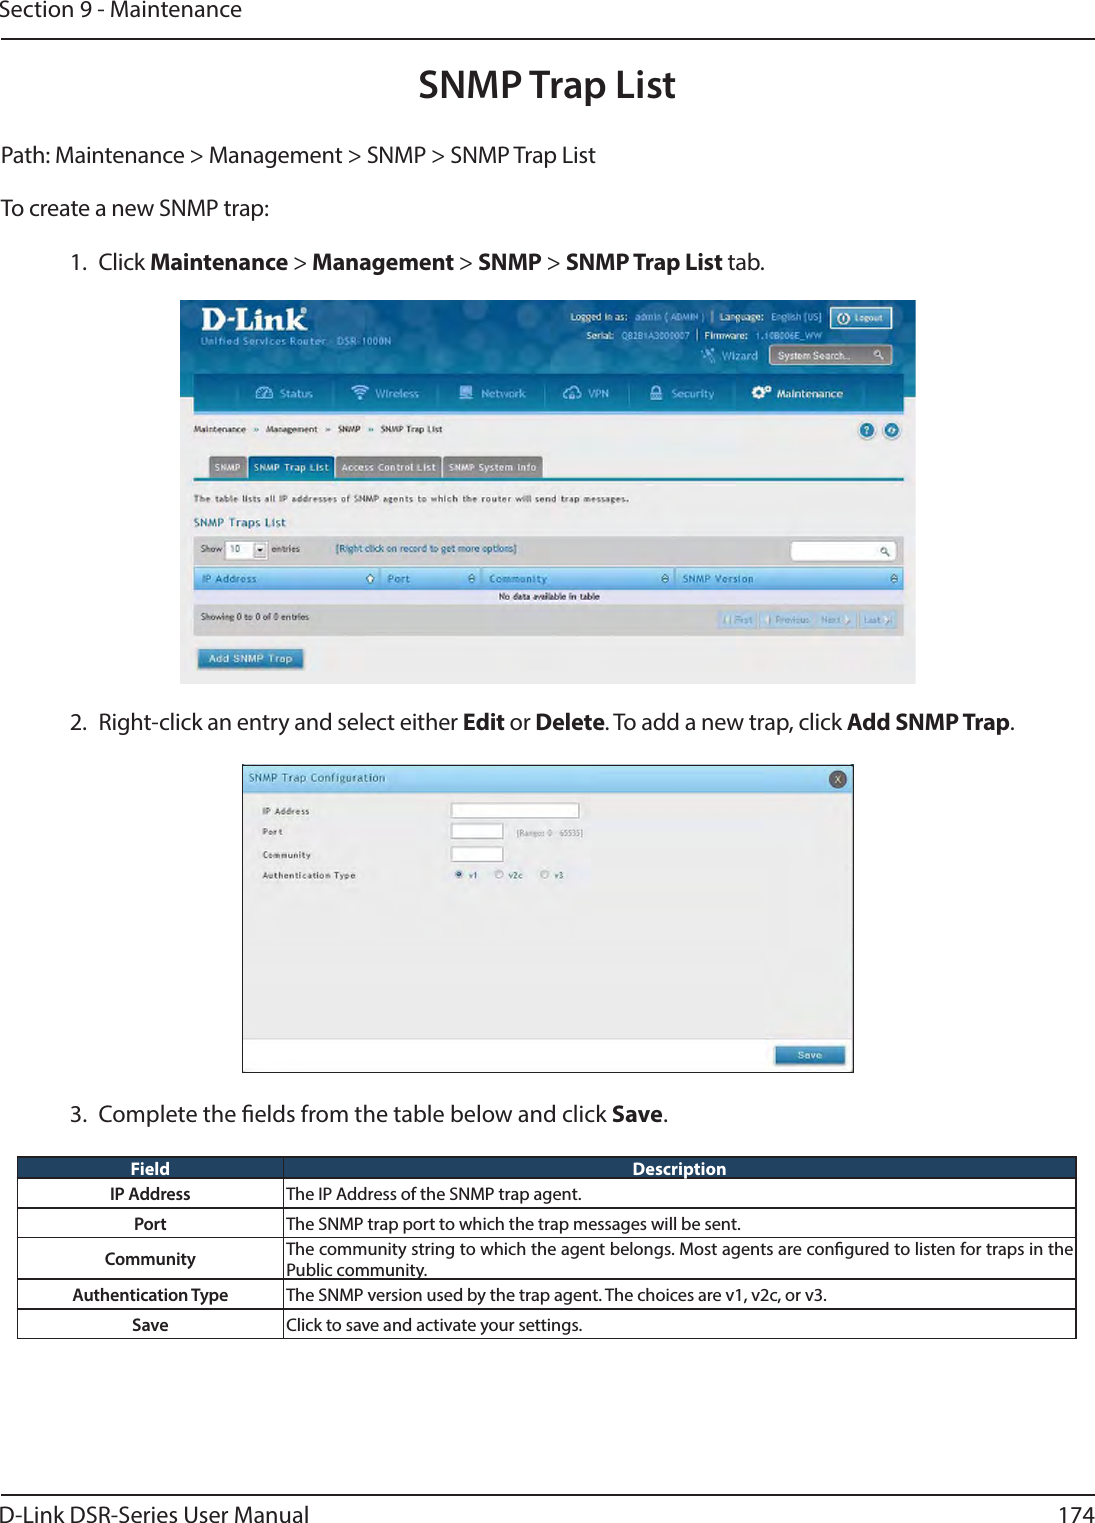 D-Link DSR-Series User Manual 174Section 9 - MaintenancePath: Maintenance &gt; Management &gt; SNMP &gt; SNMP Trap List To create a new SNMP trap:1. Click Maintenance &gt; Management &gt; SNMP &gt; SNMP Trap List tab.SNMP Trap List2.  Right-click an entry and select either Edit or Delete. To add a new trap, click Add SNMP Trap.3.  Complete the elds from the table below and click Save.Field DescriptionIP Address The IP Address of the SNMP trap agent.Port The SNMP trap port to which the trap messages will be sent.Community The community string to which the agent belongs. Most agents are congured to listen for traps in the Public community.Authentication Type The SNMP version used by the trap agent. The choices are v1, v2c, or v3.Save Click to save and activate your settings.